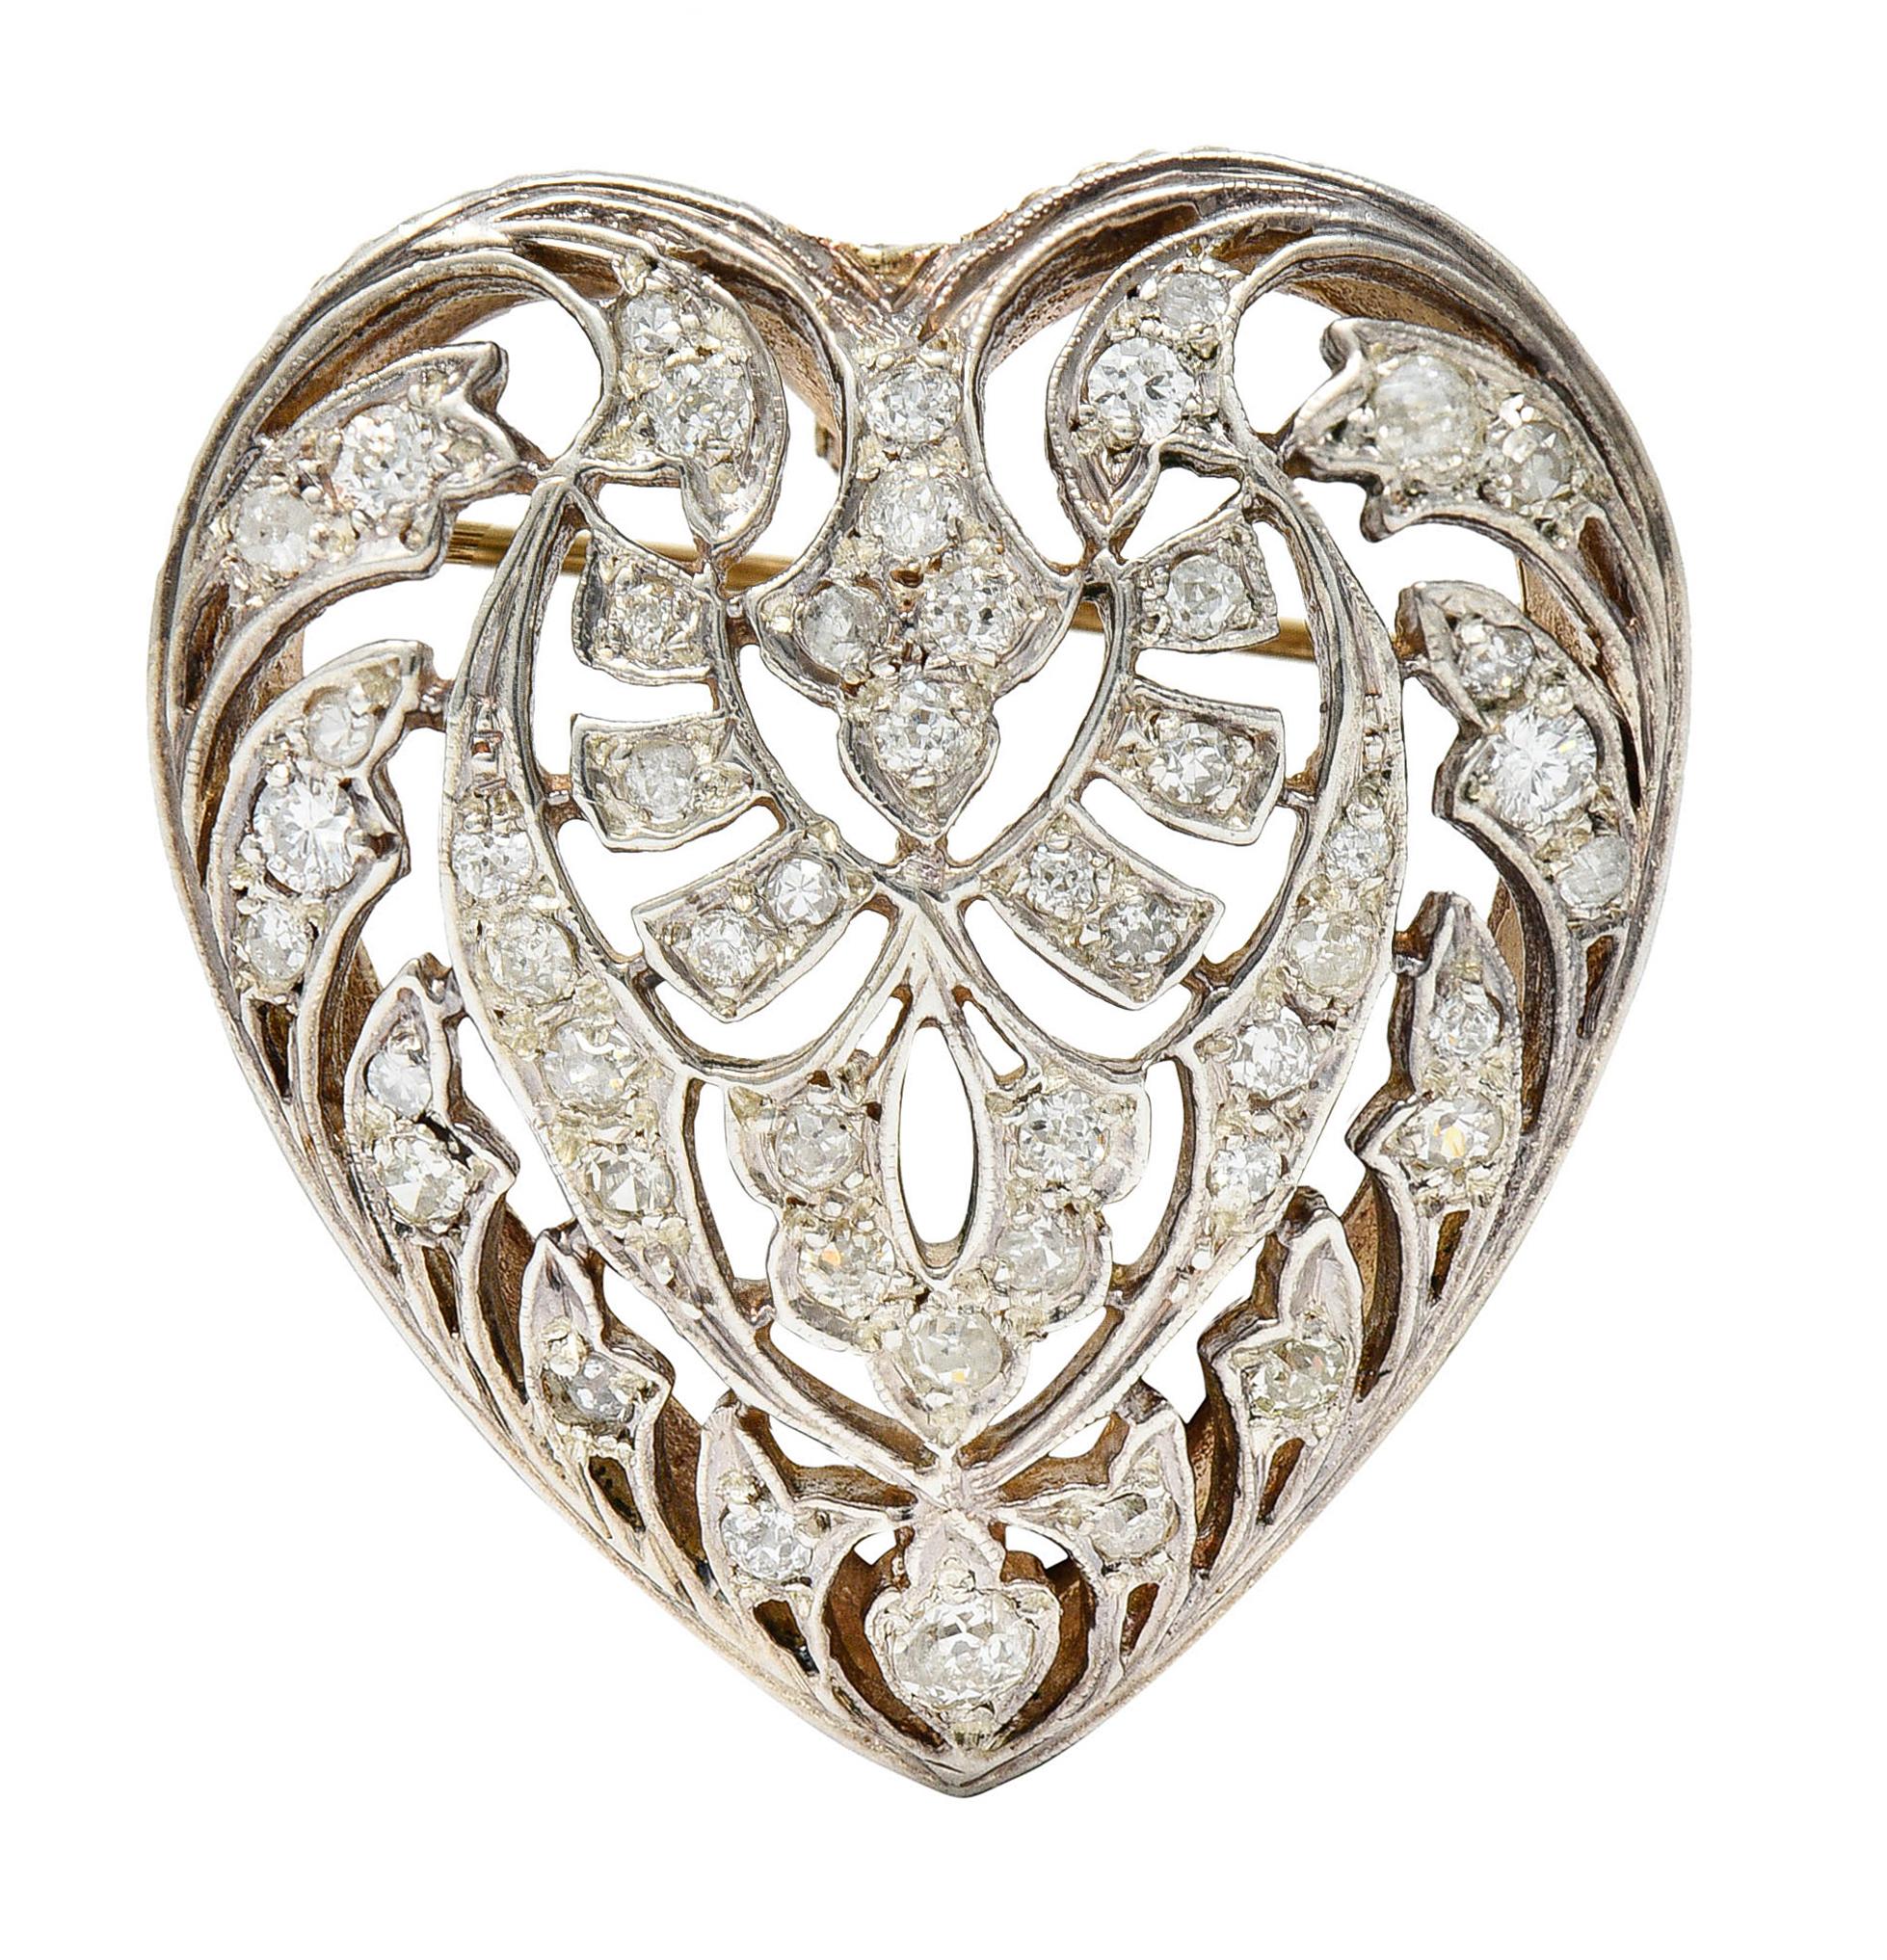 Pendant brooch is designed as a pierced and scrolling heart

Accented throughout by single and old European cut diamonds

Weighing in total approximately 1.35 carats with varied color and clarity - consistent with age

Completed by a pin stem with